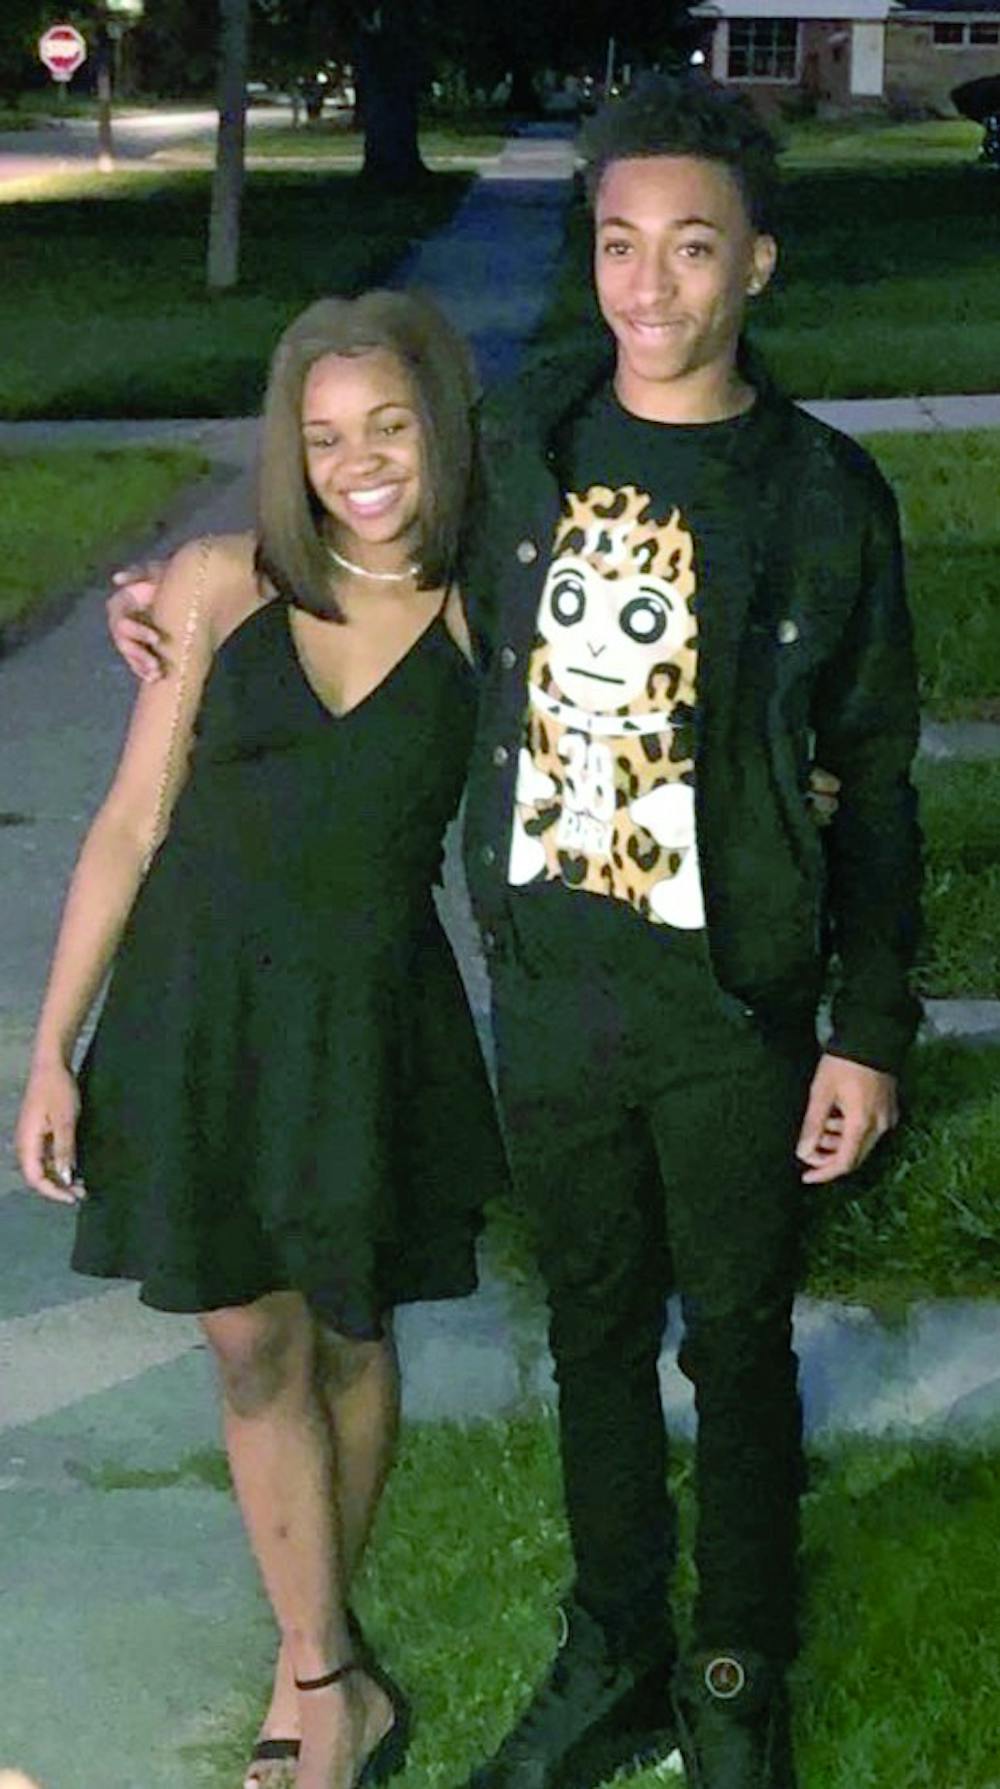 <p>Sophomores Imani Peterson and Javier Hicks pose for a photo on their way to Mumford’s homecoming dance on Oct. 5. Peterson and Hicks were able to get tickets despite the limited supply.</p>